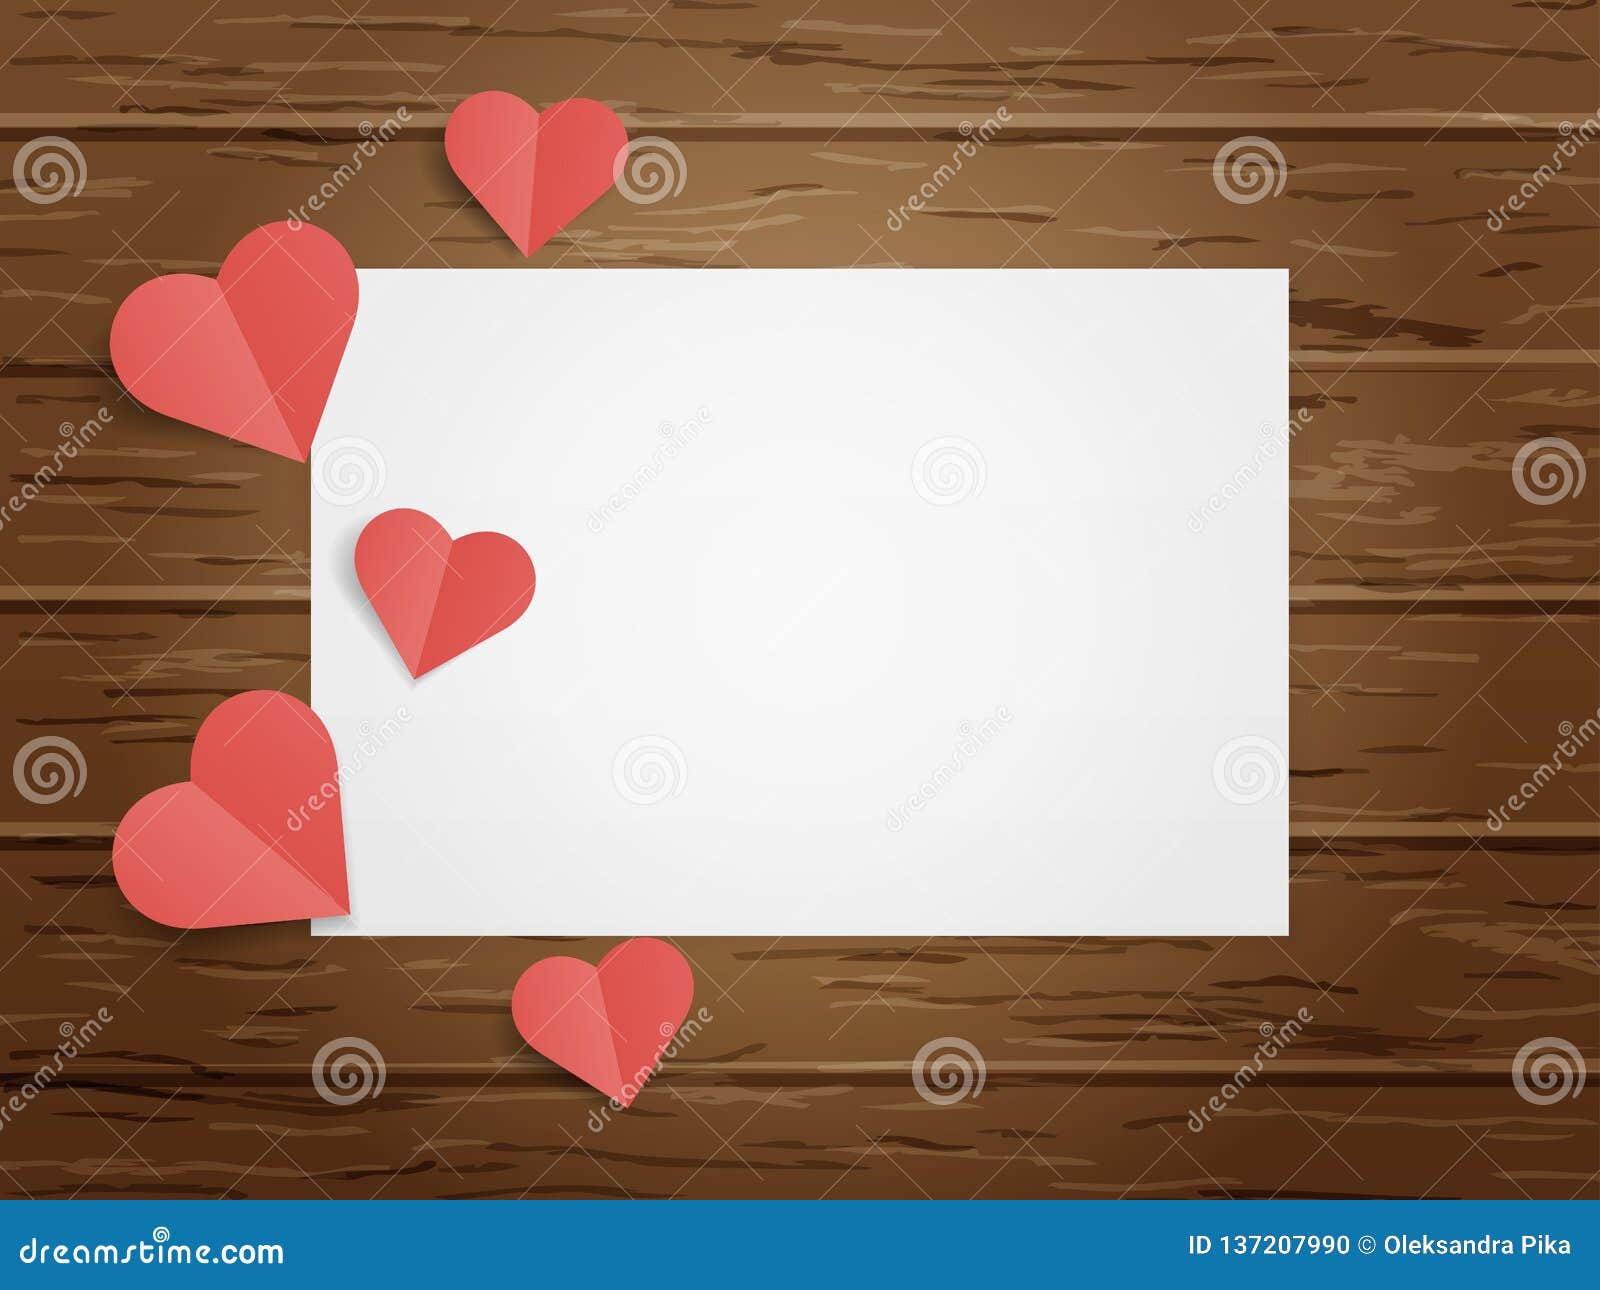 Red origami paper hearts on wood board background Vector Image